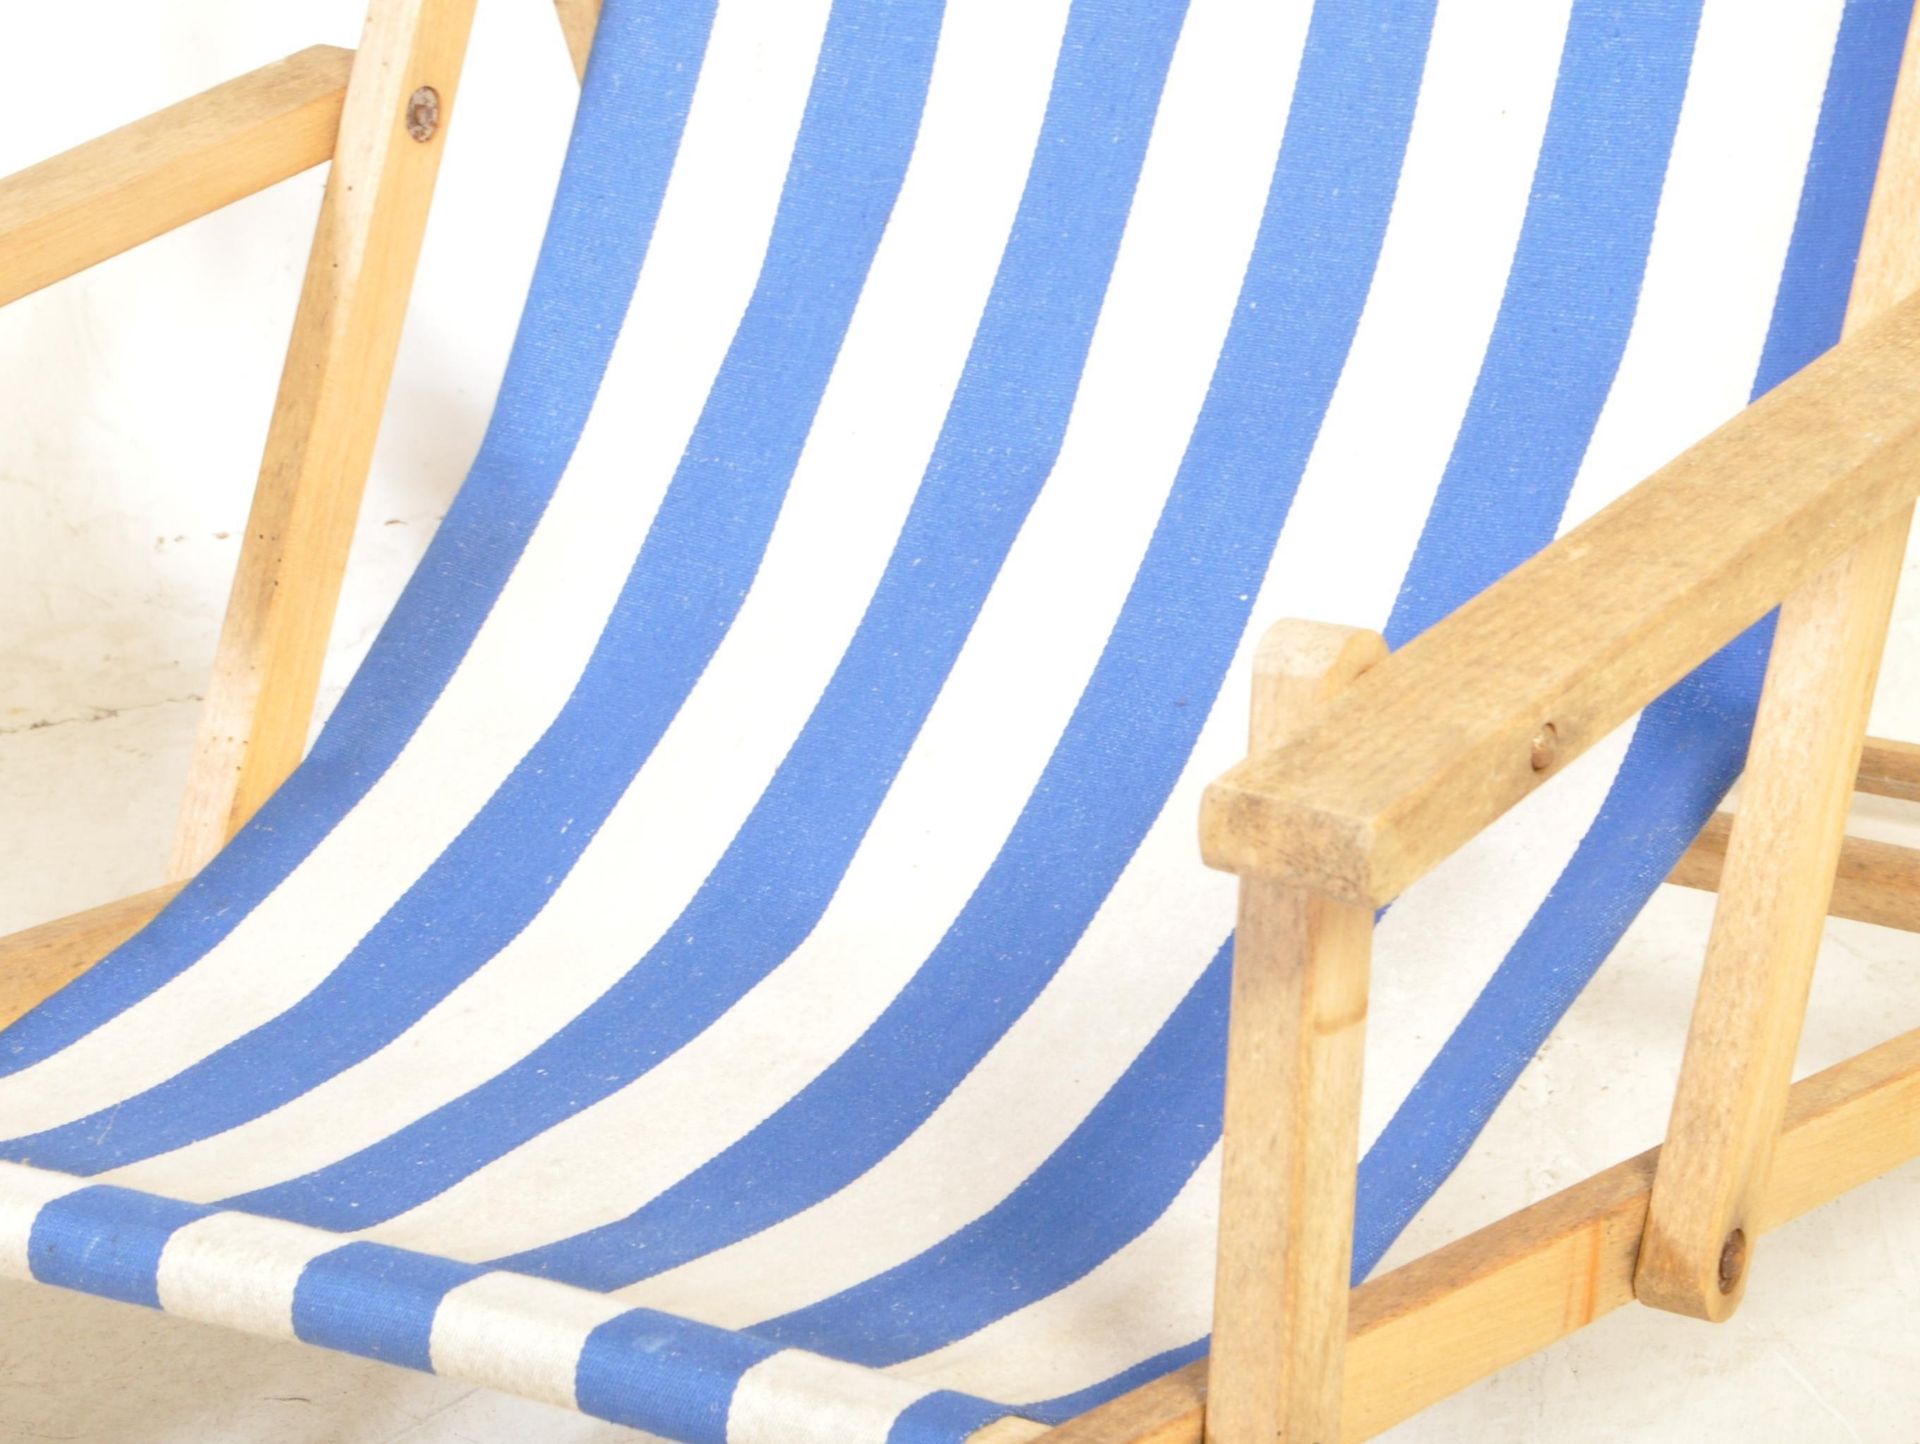 PAIR OF RETRO 20TH CENTURY FOLDING DECK CHAIRS - Image 2 of 5